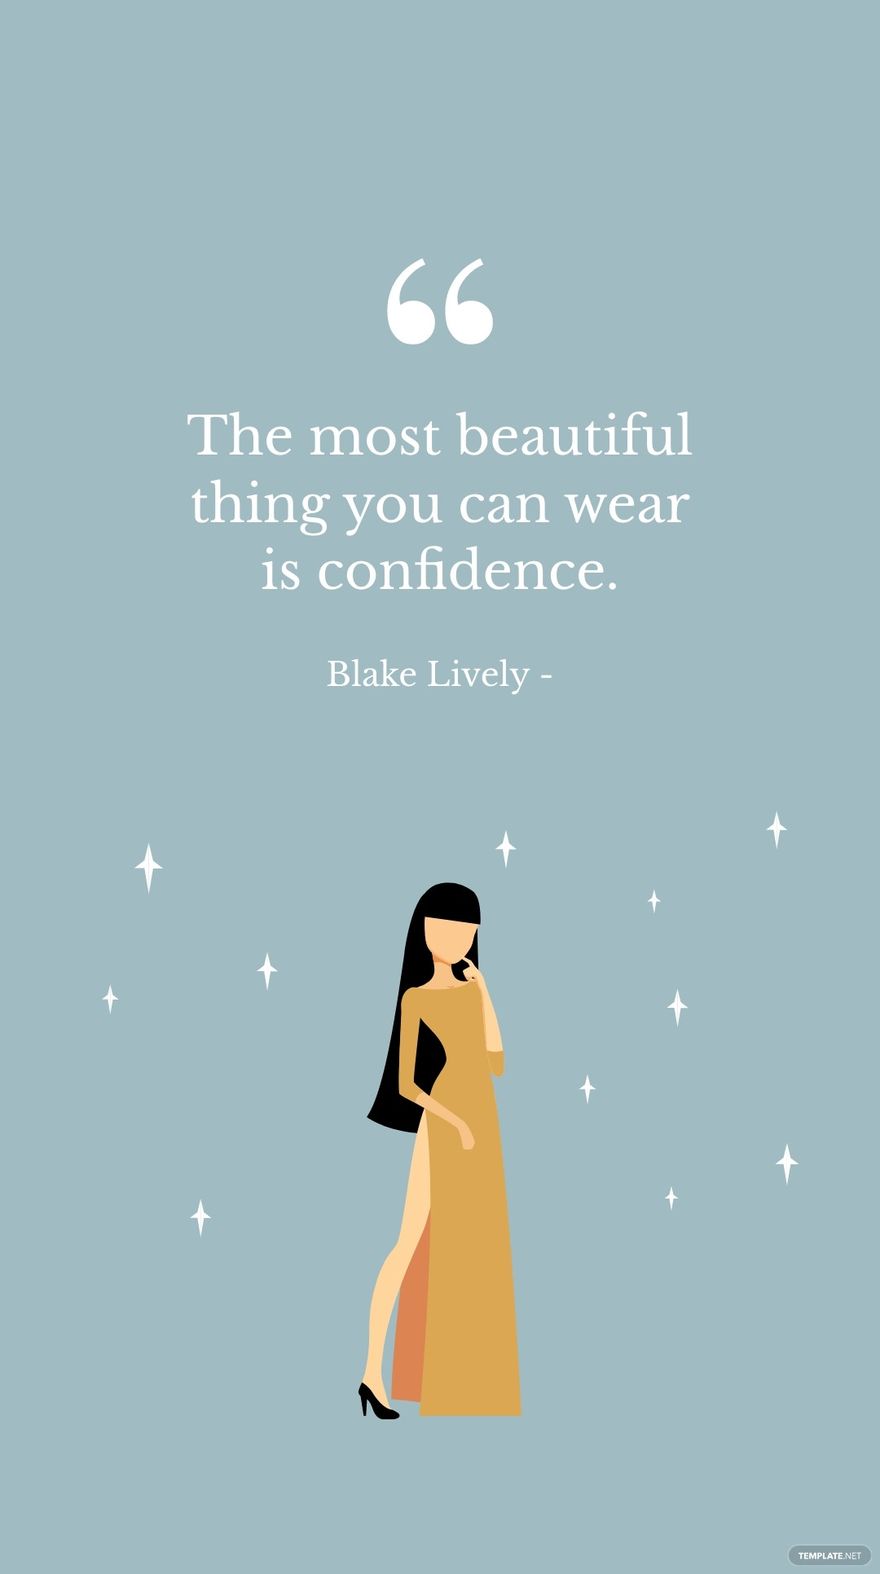 Blake Lively - The most beautiful thing you can wear is confidence.